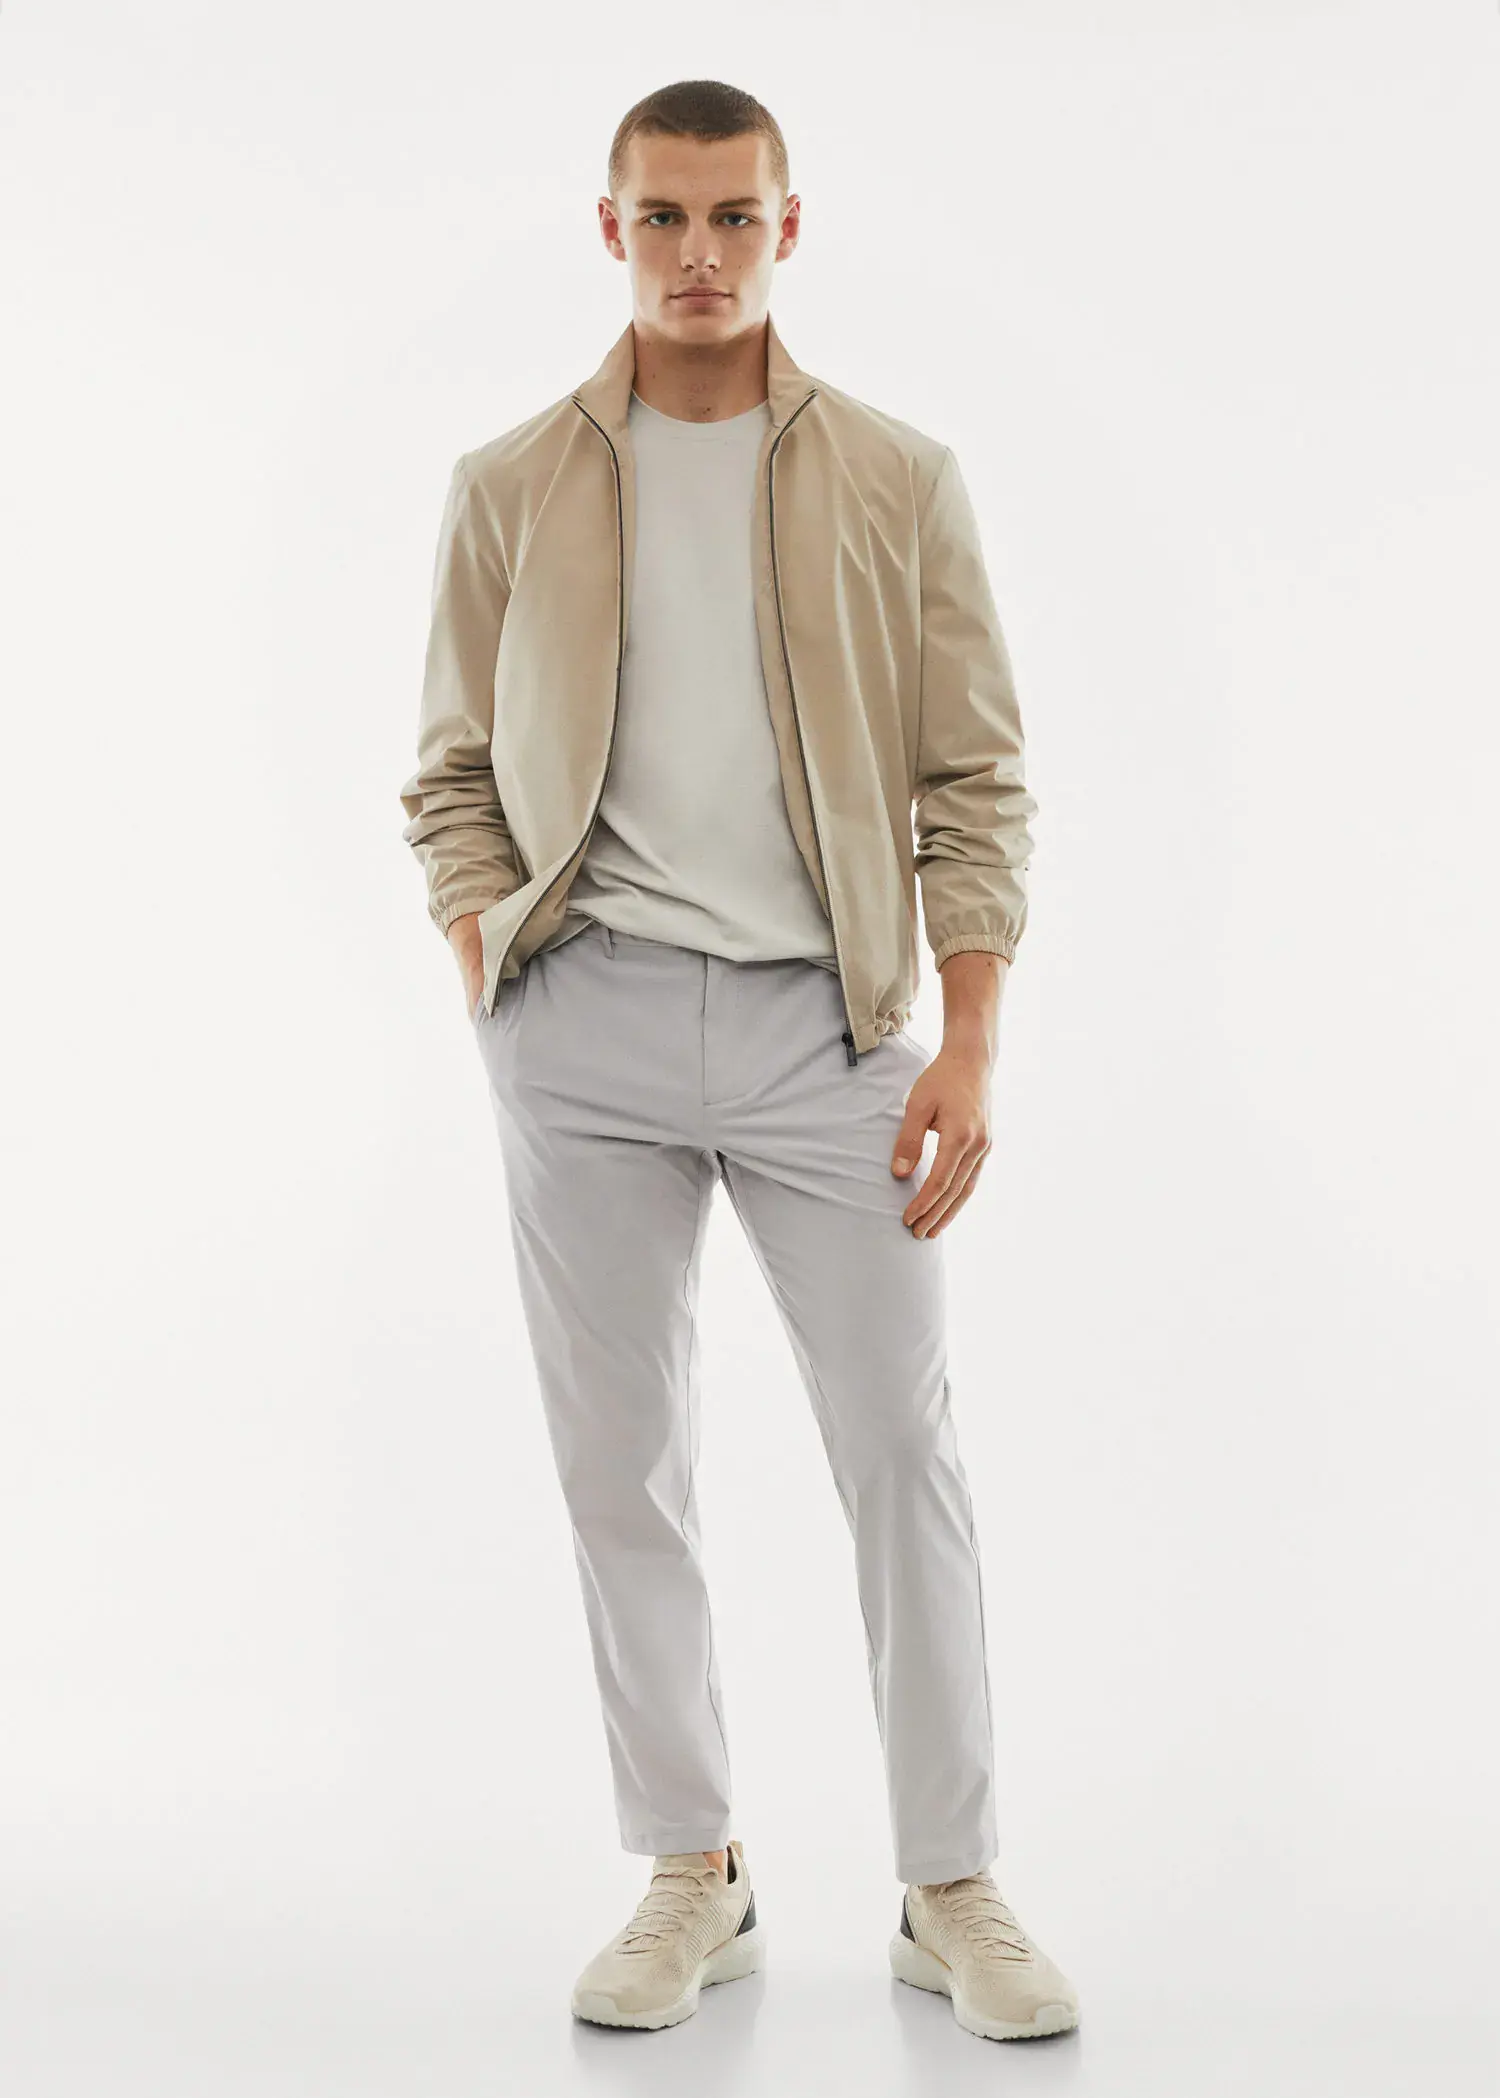 Mango Water-repellent technical pants. a man in a tan jacket and white shirt. 